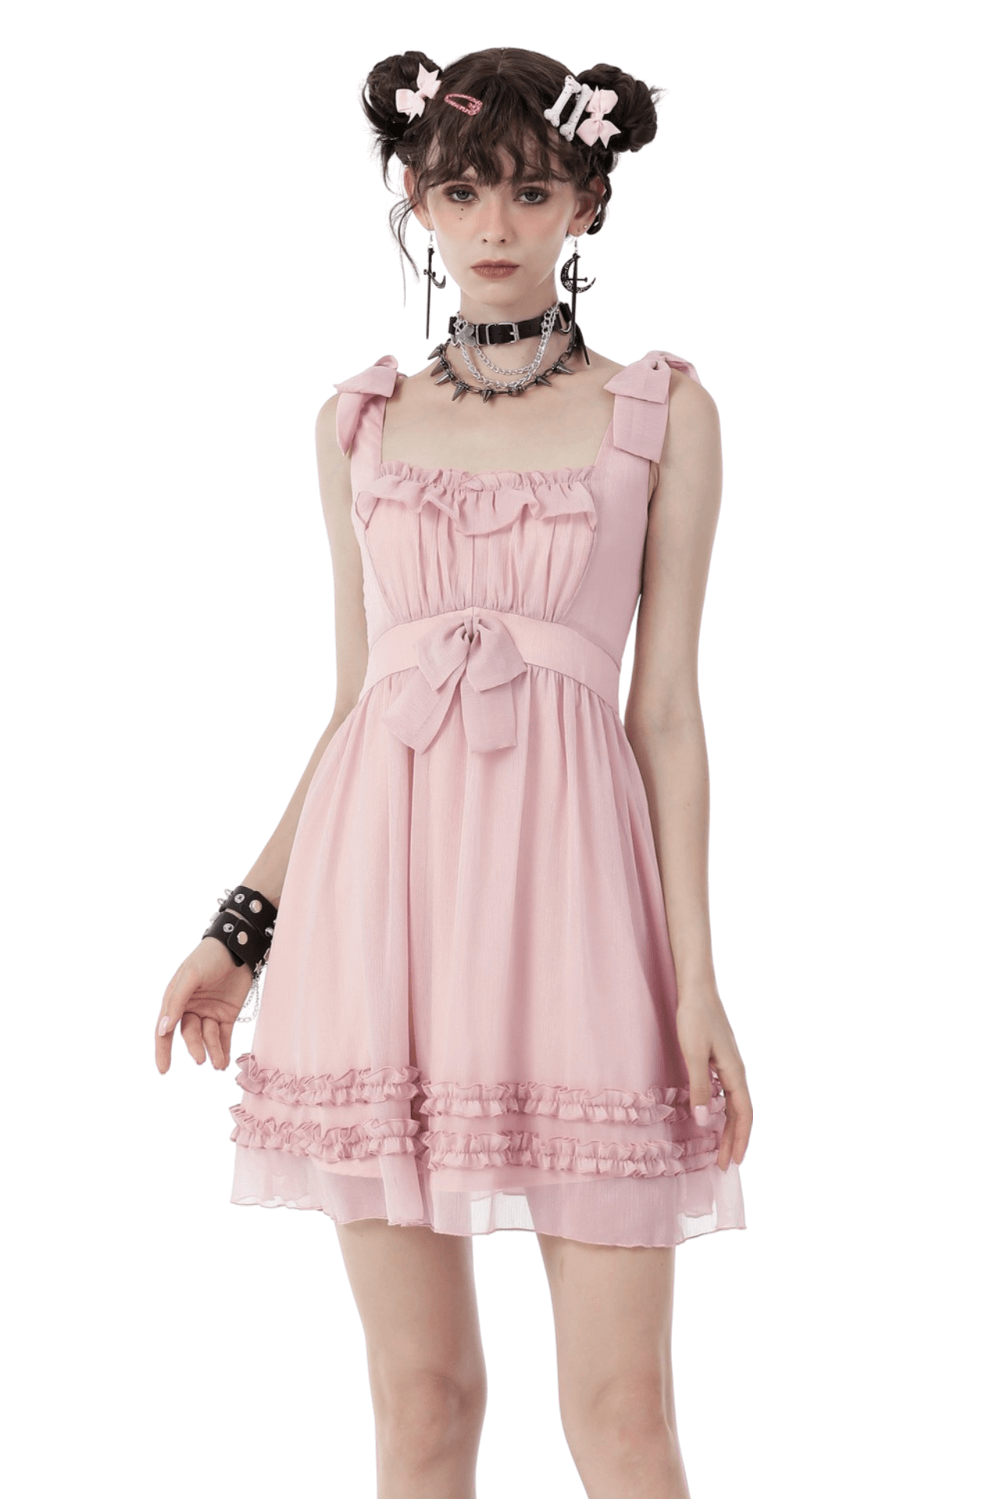 Elegant Pink Ruffle Doll Dress with Sweet Front Bow